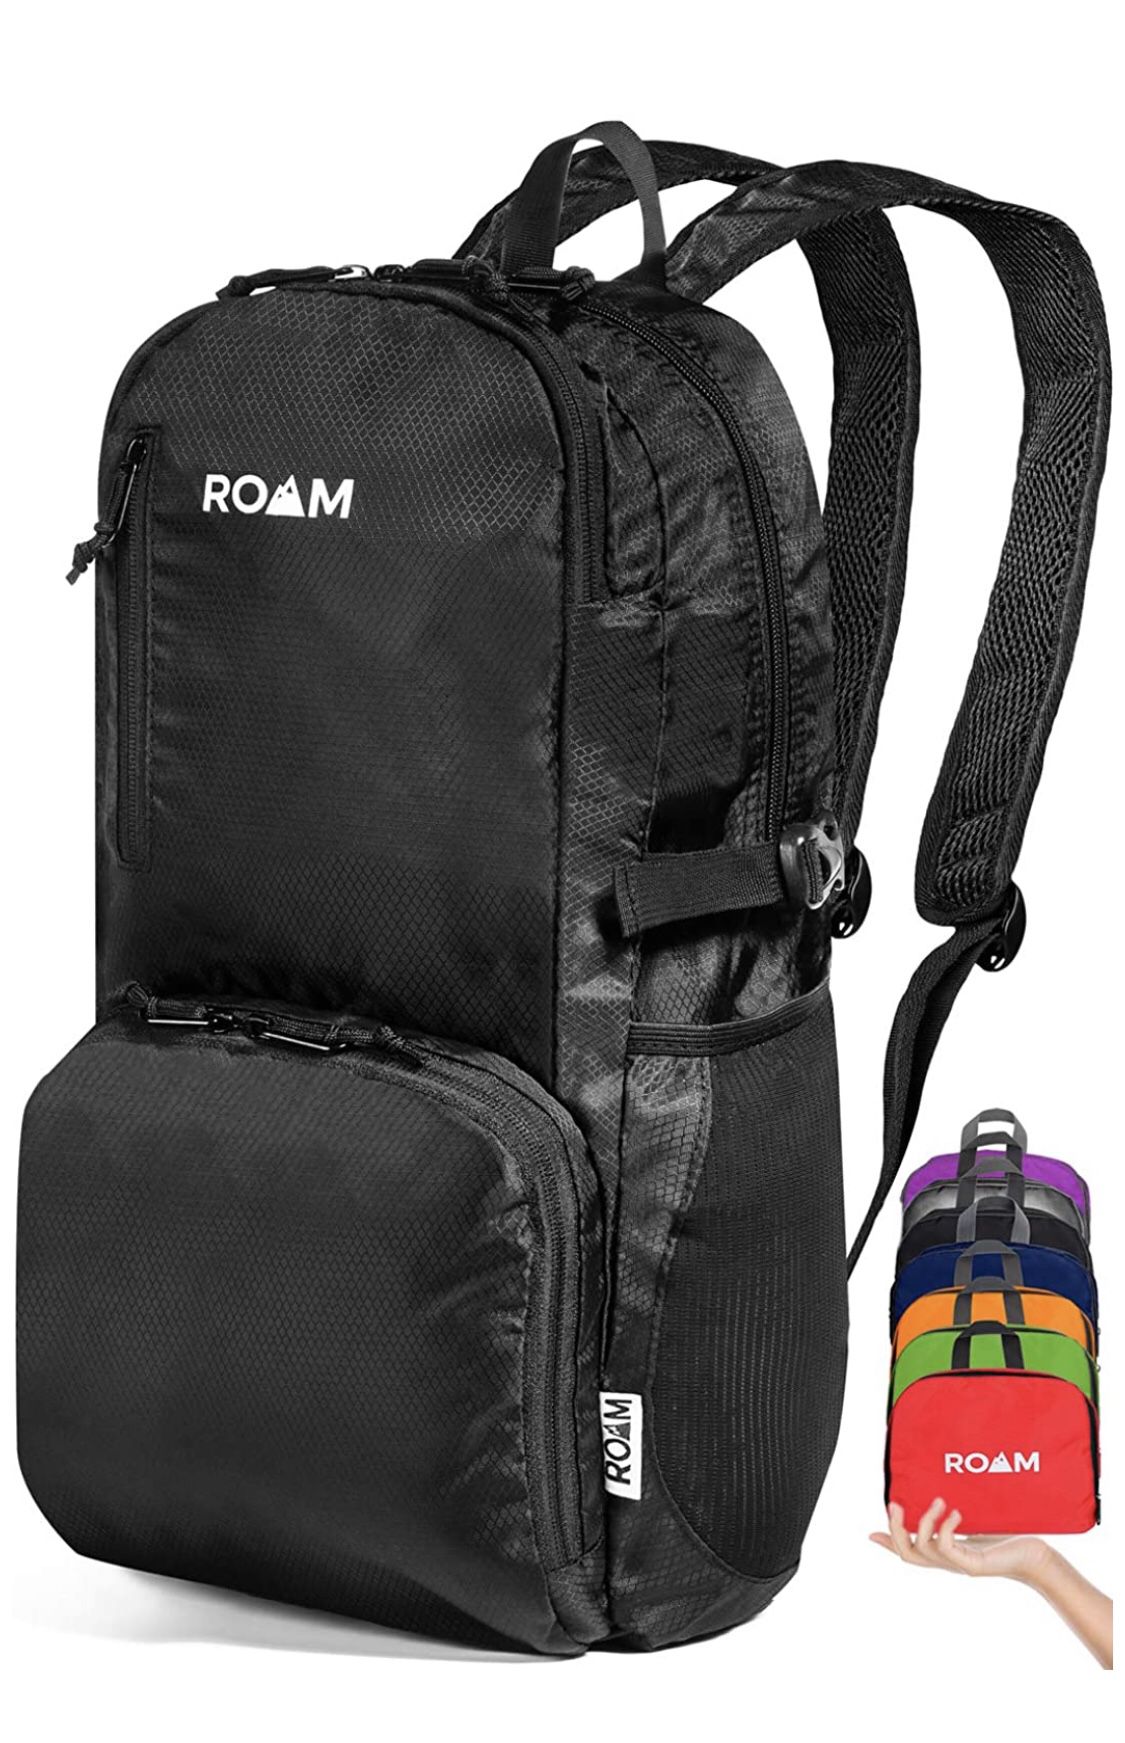 Lightweight Packable Backpack Small Water Resistant Travel Hiking Daypack